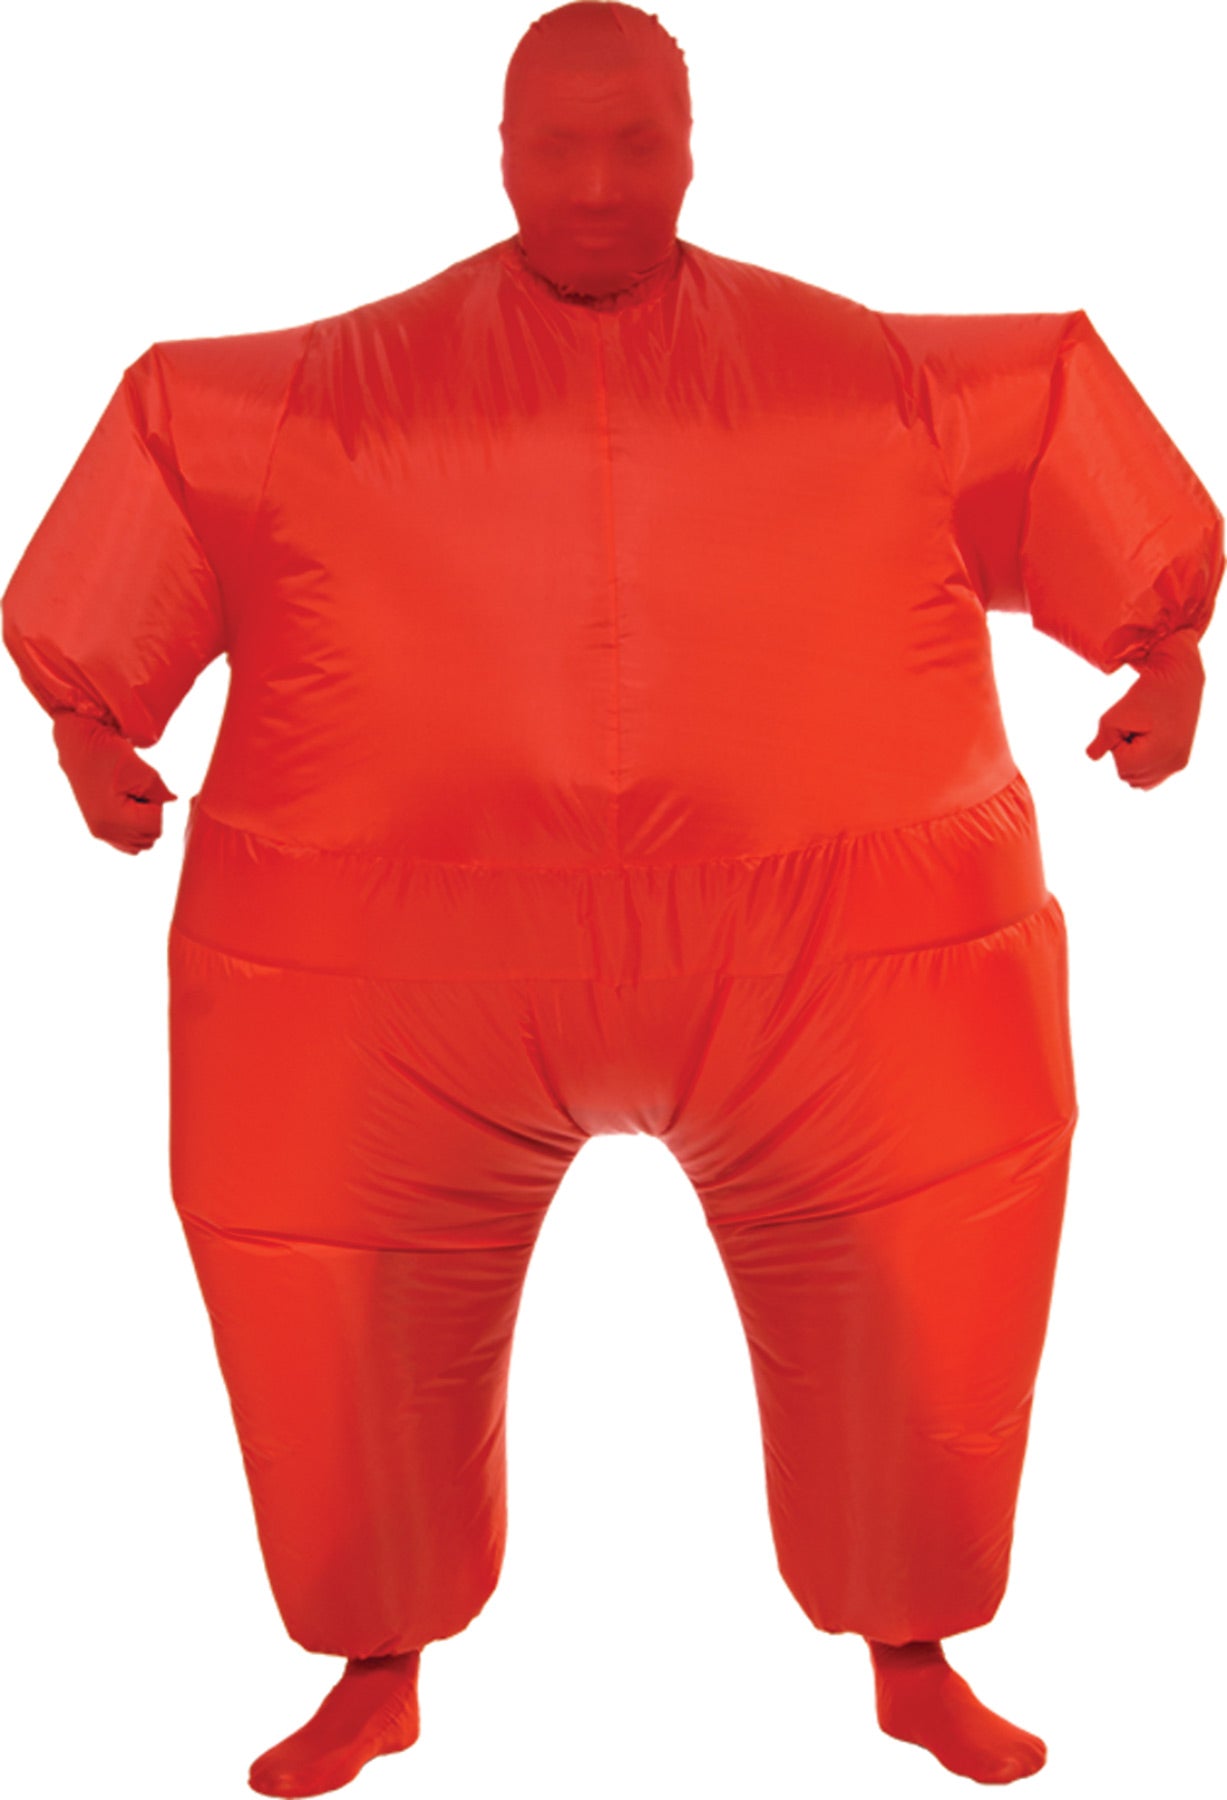 Red Skin Suit Inflatable Costume